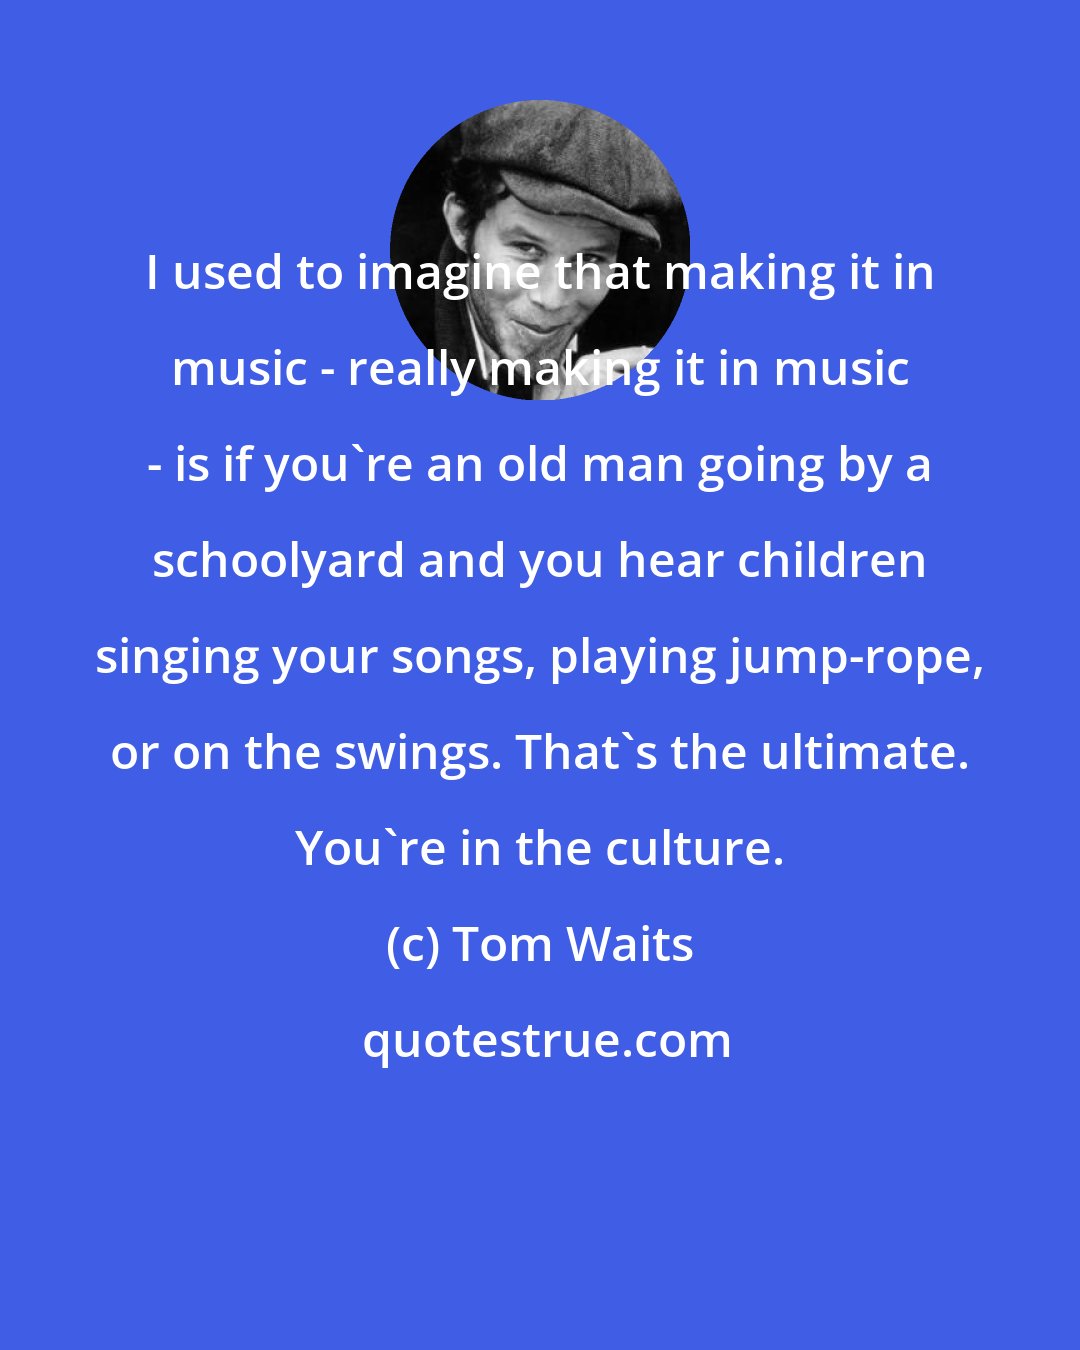 Tom Waits: I used to imagine that making it in music - really making it in music - is if you're an old man going by a schoolyard and you hear children singing your songs, playing jump-rope, or on the swings. That's the ultimate. You're in the culture.